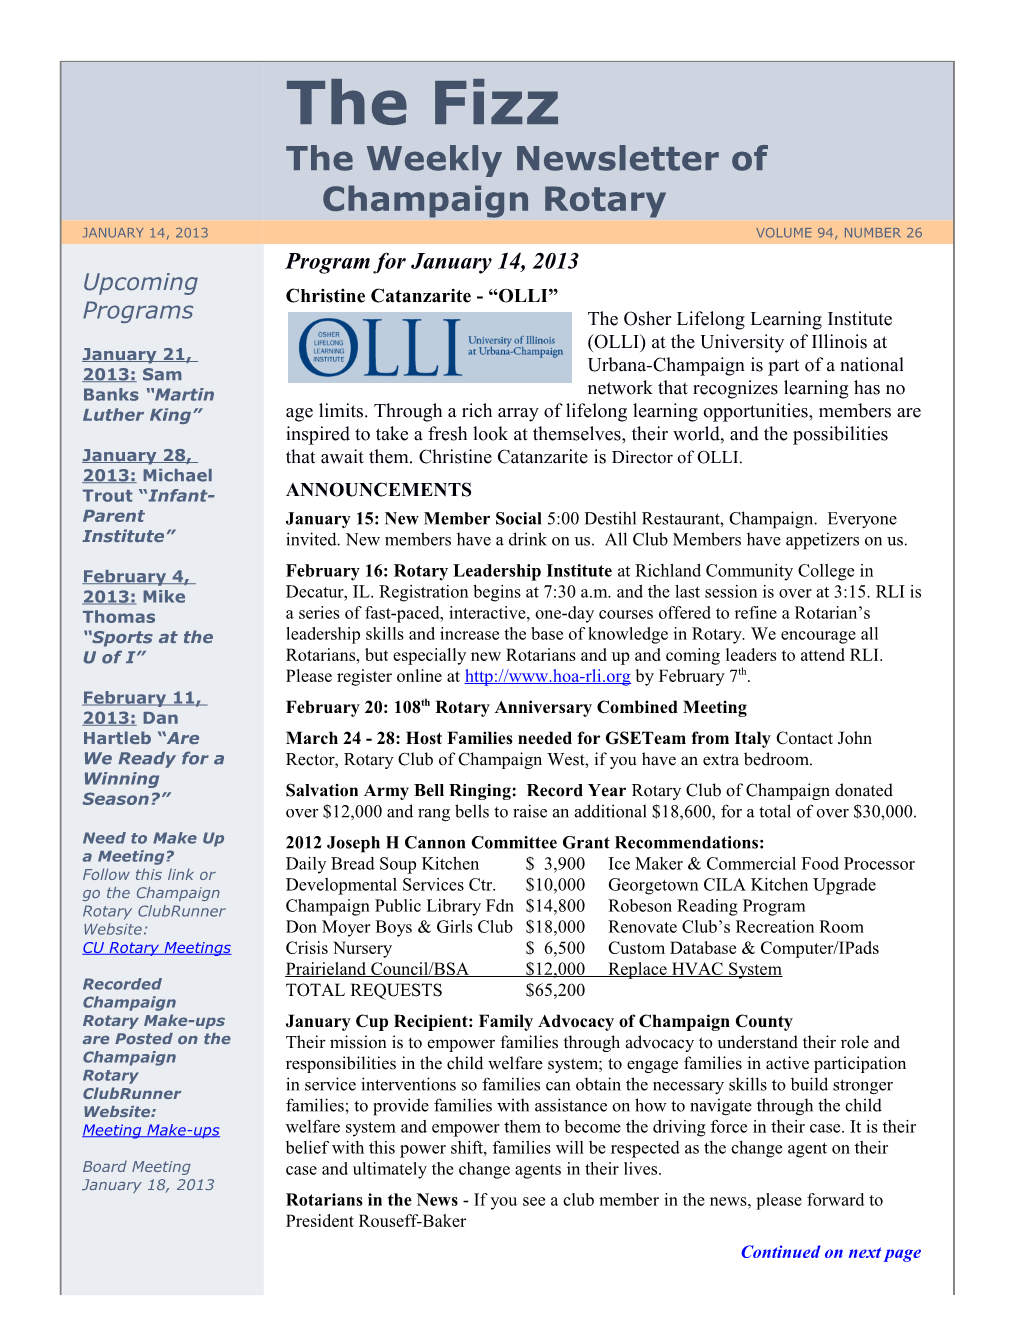 The Weekly Newsletter of Champaign Rotary